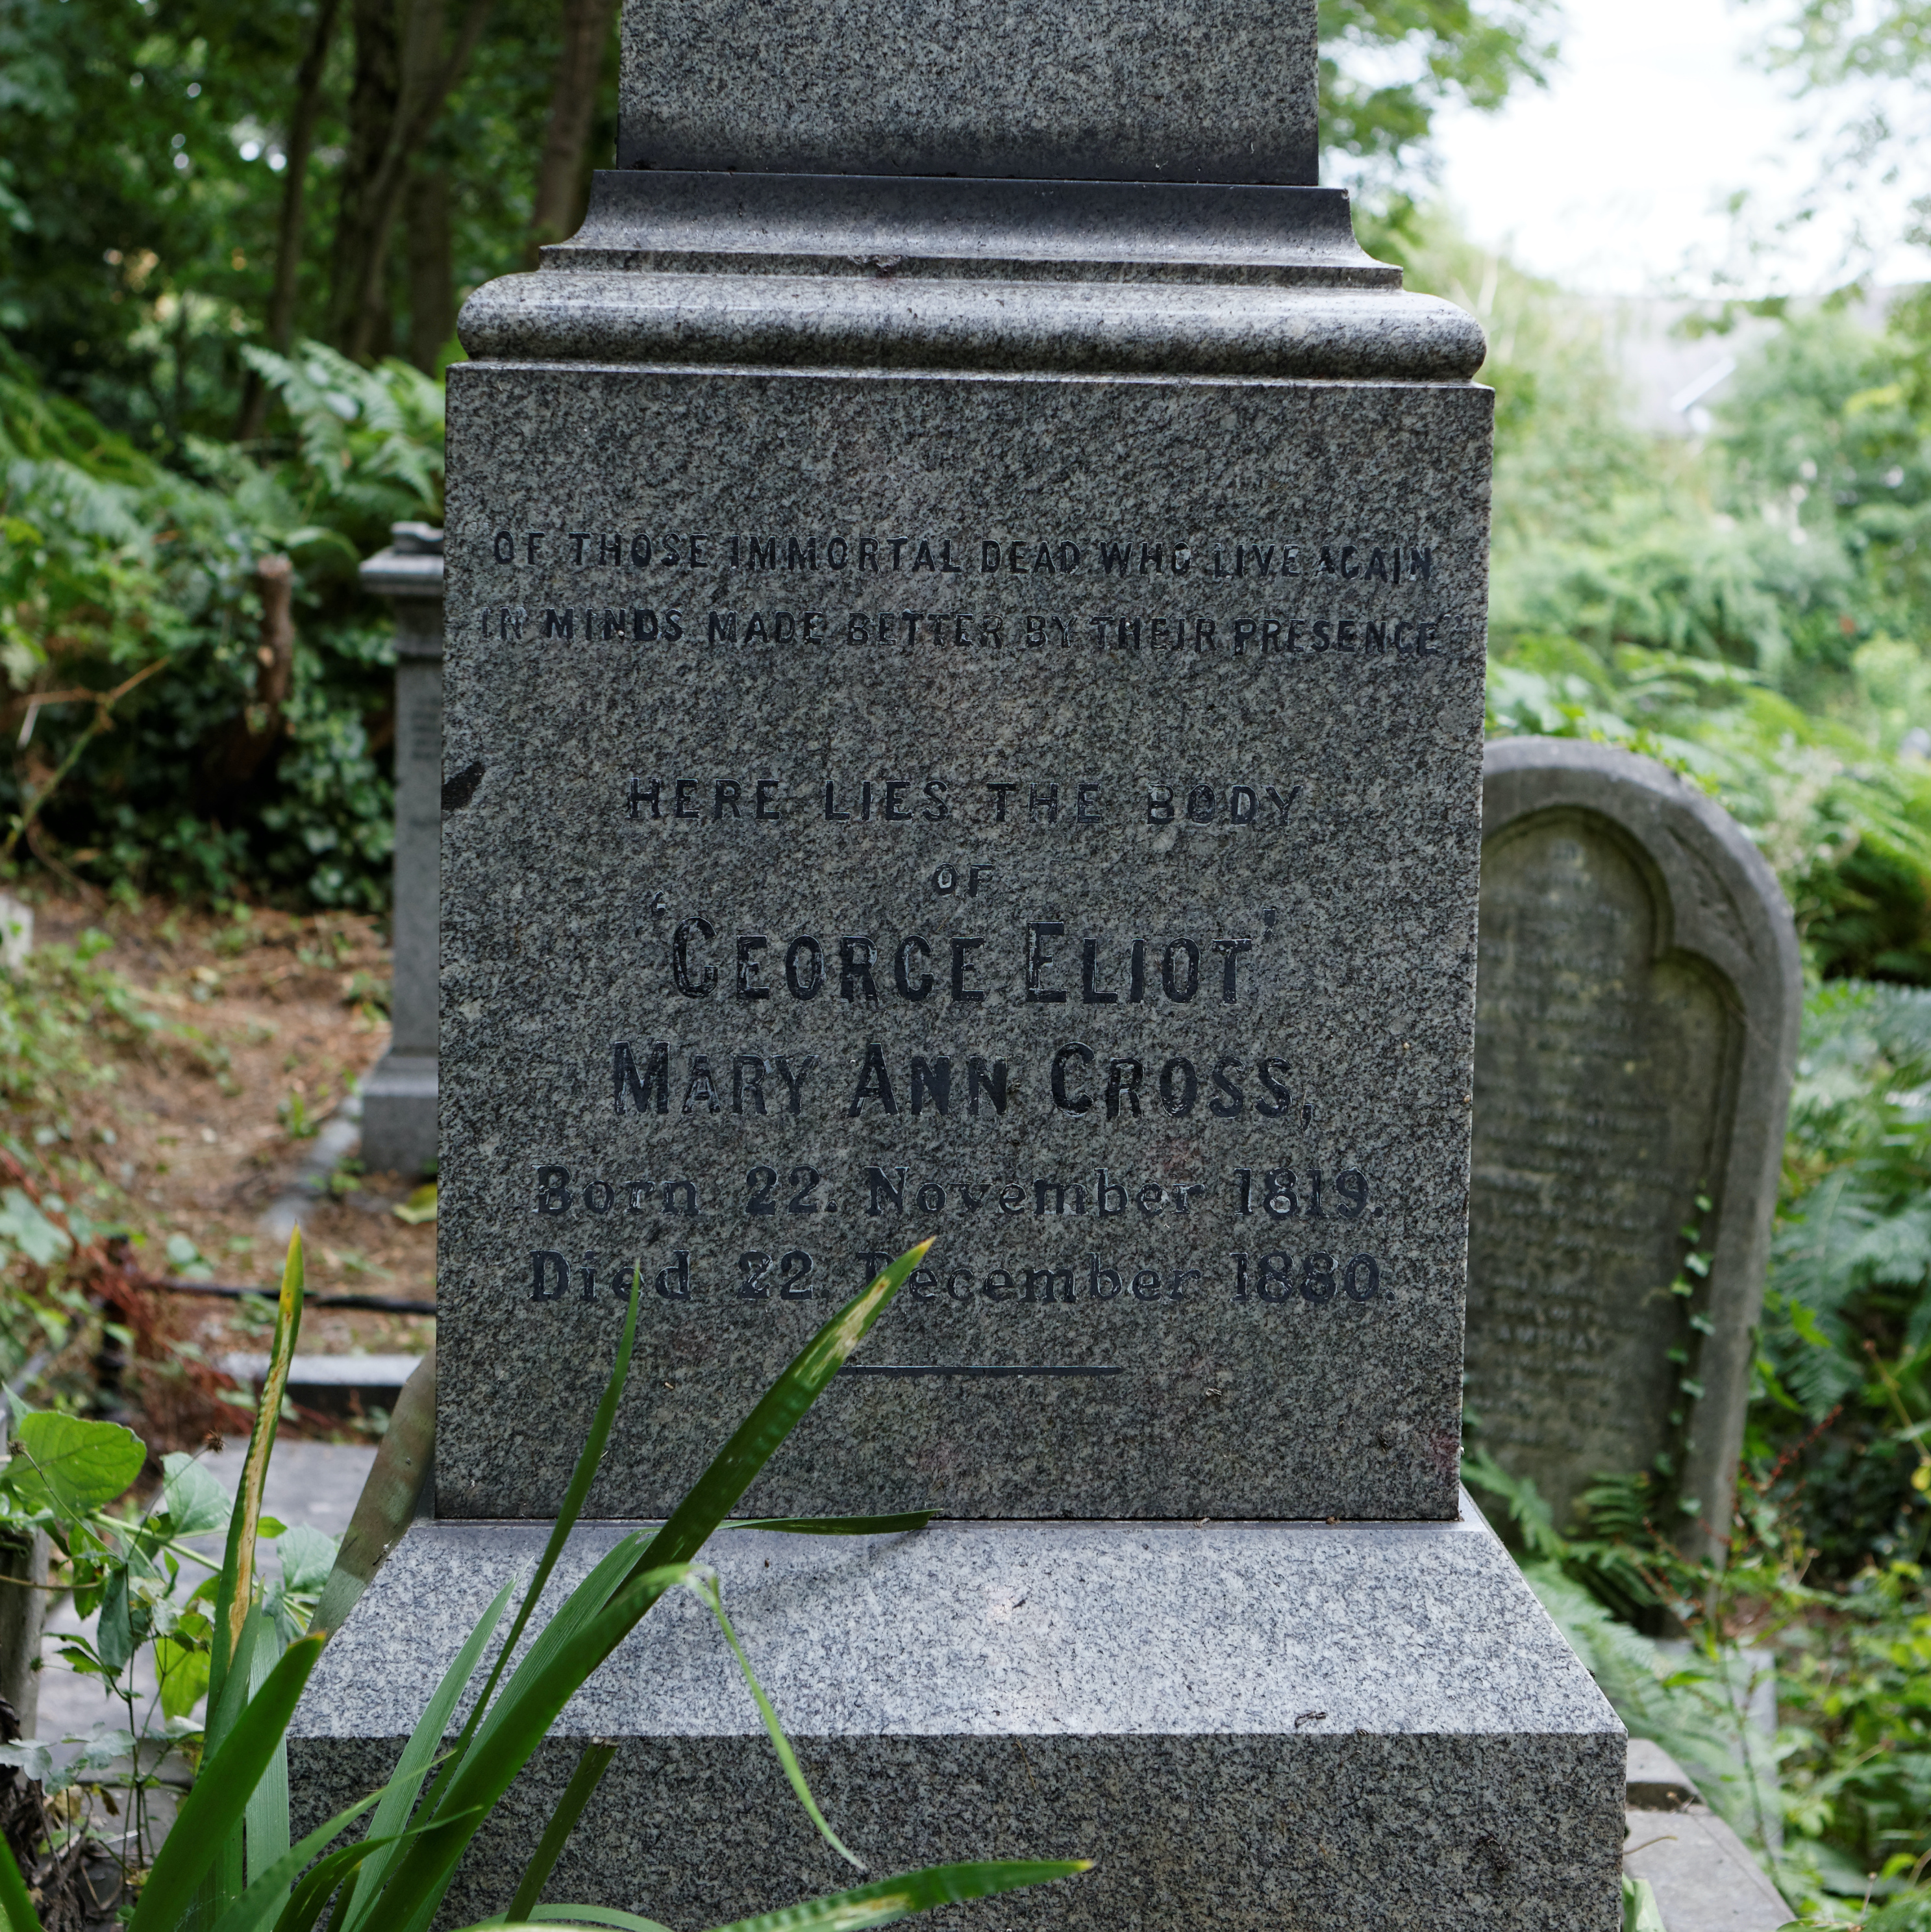 George Eliot’s Precarious Afterlives